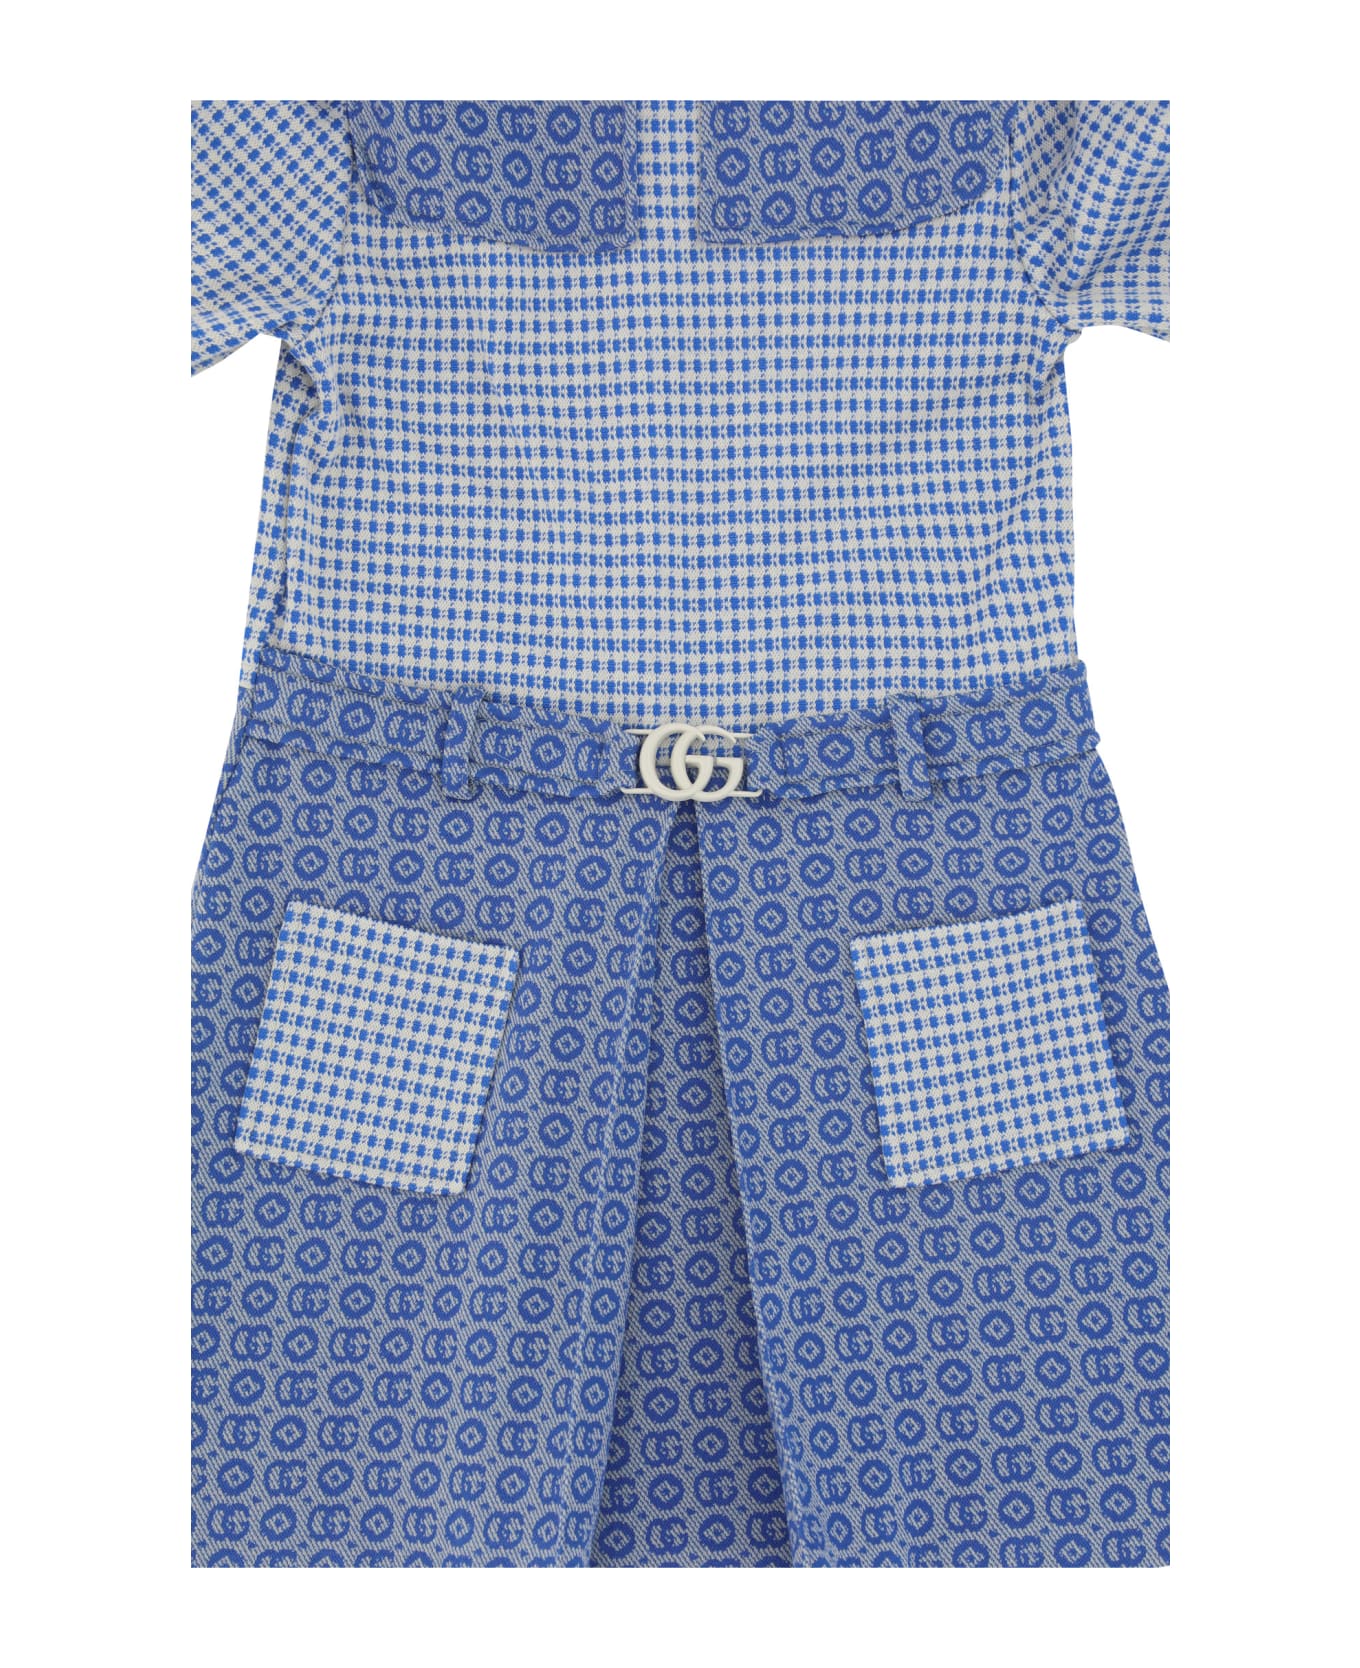 Gucci Dress For Girl - Bluette/ivory/mix